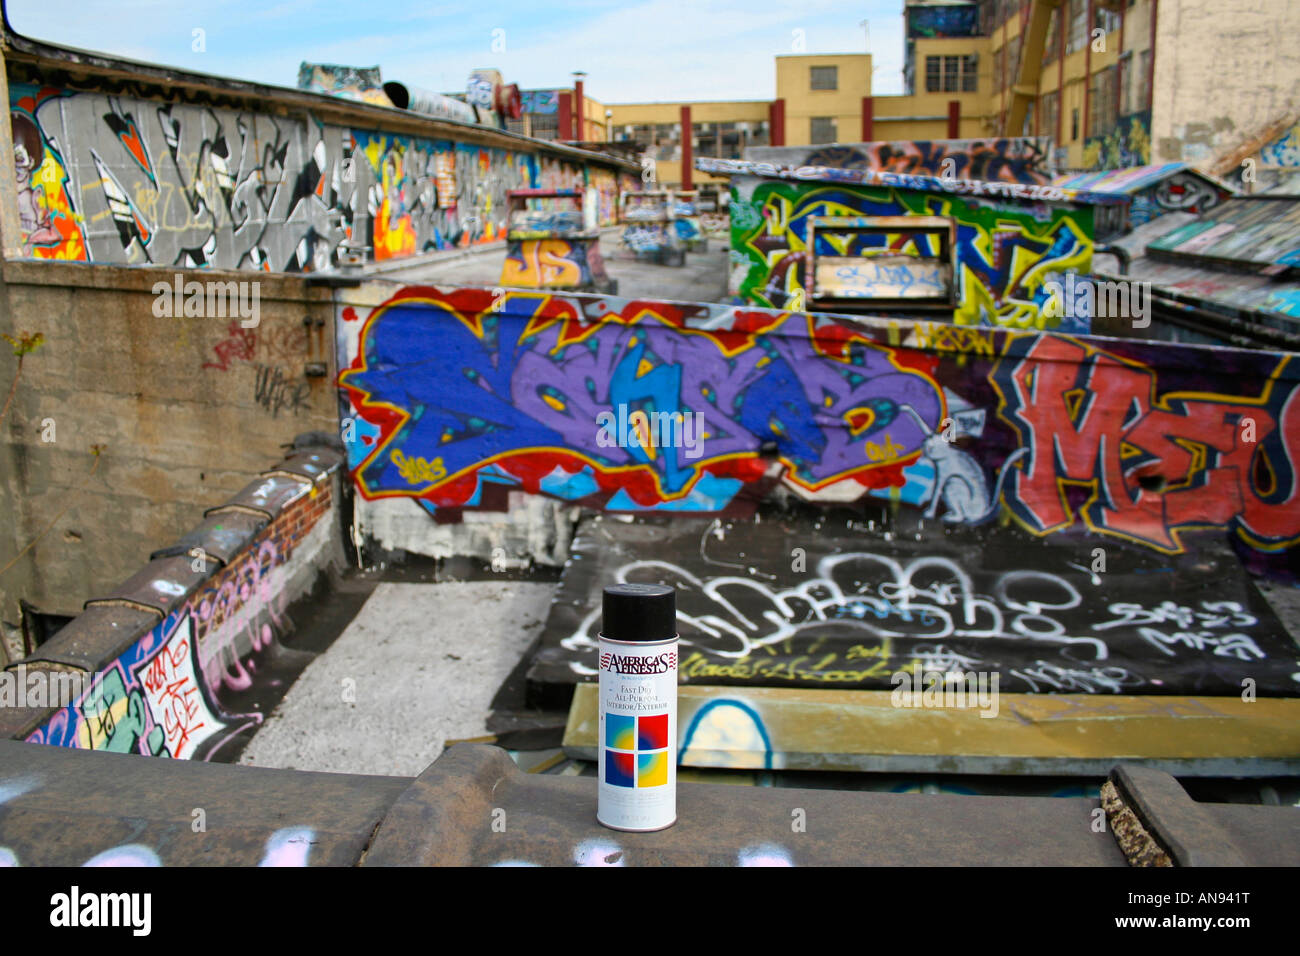 Americas Finest Brand Spraypaint Can and Graffiti at 5 pointz warehouse in Long Island City Stock Photo